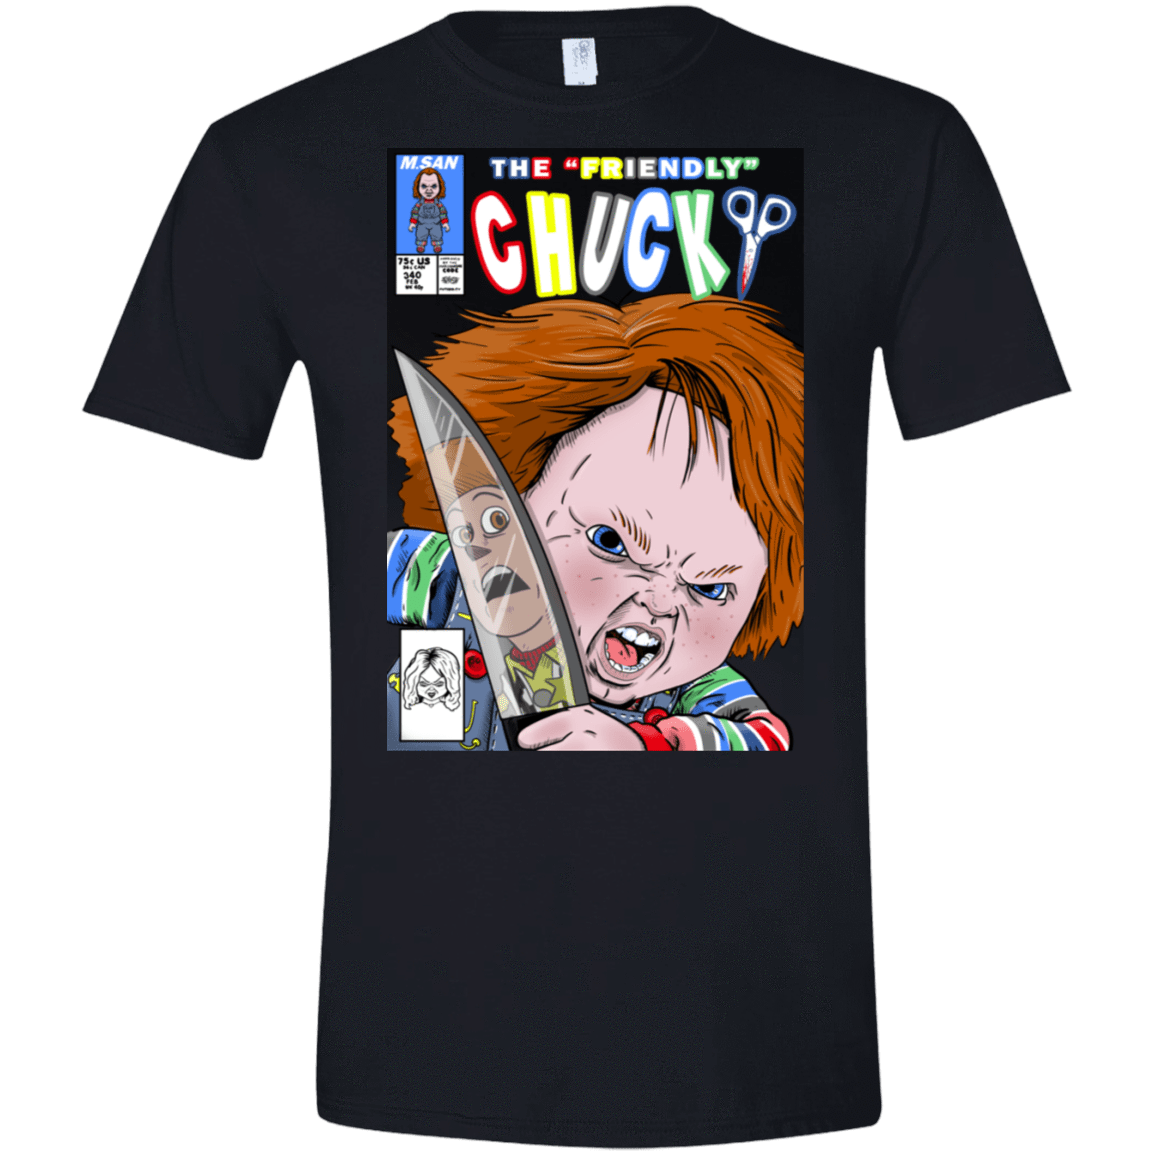 T-Shirts Black / S The Friendly Chucky Men's Semi-Fitted Softstyle